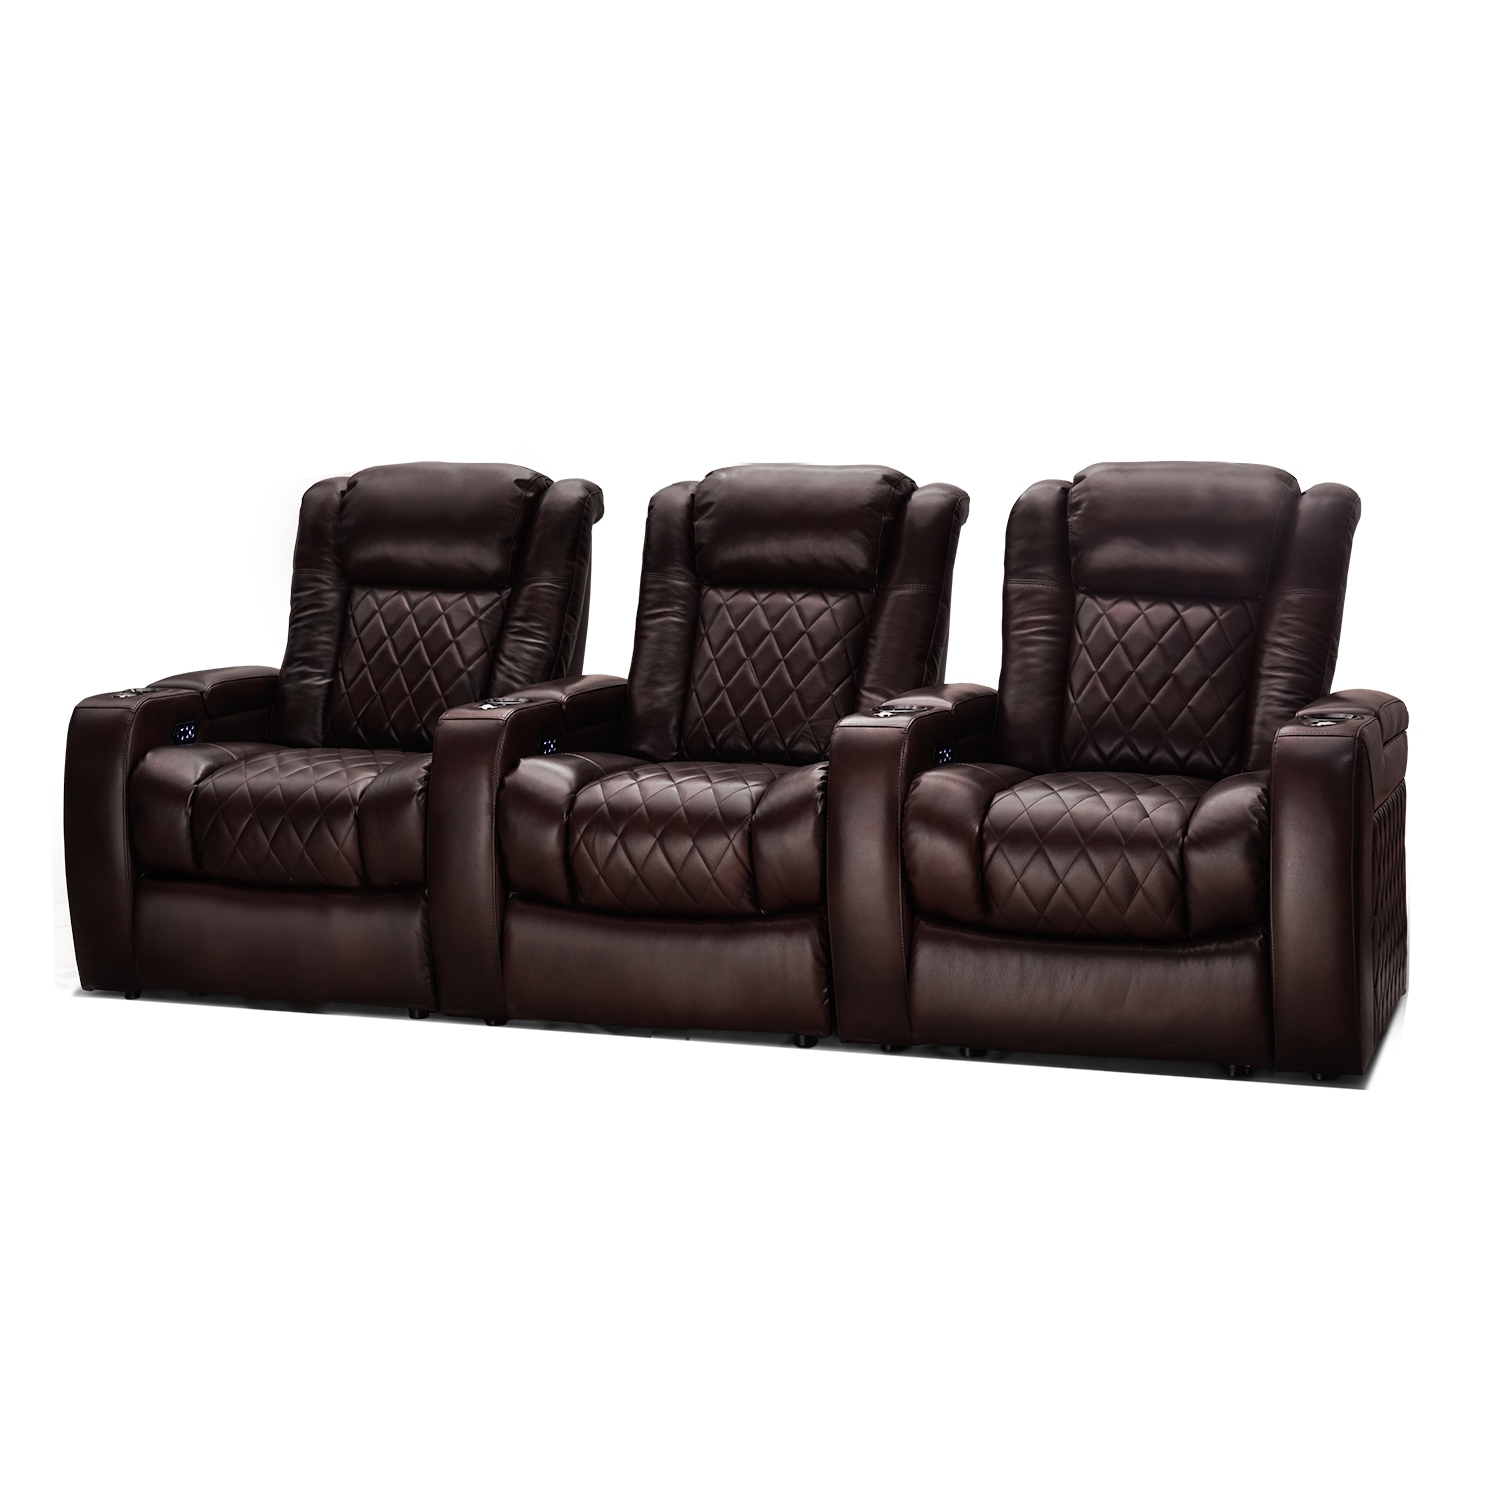 Lumbar Recliner with Extra Space Home Theatre seat Brown, Row of 2 Valencia Tuscany XL Premium Top Grain Nappa Leather Power Headrest